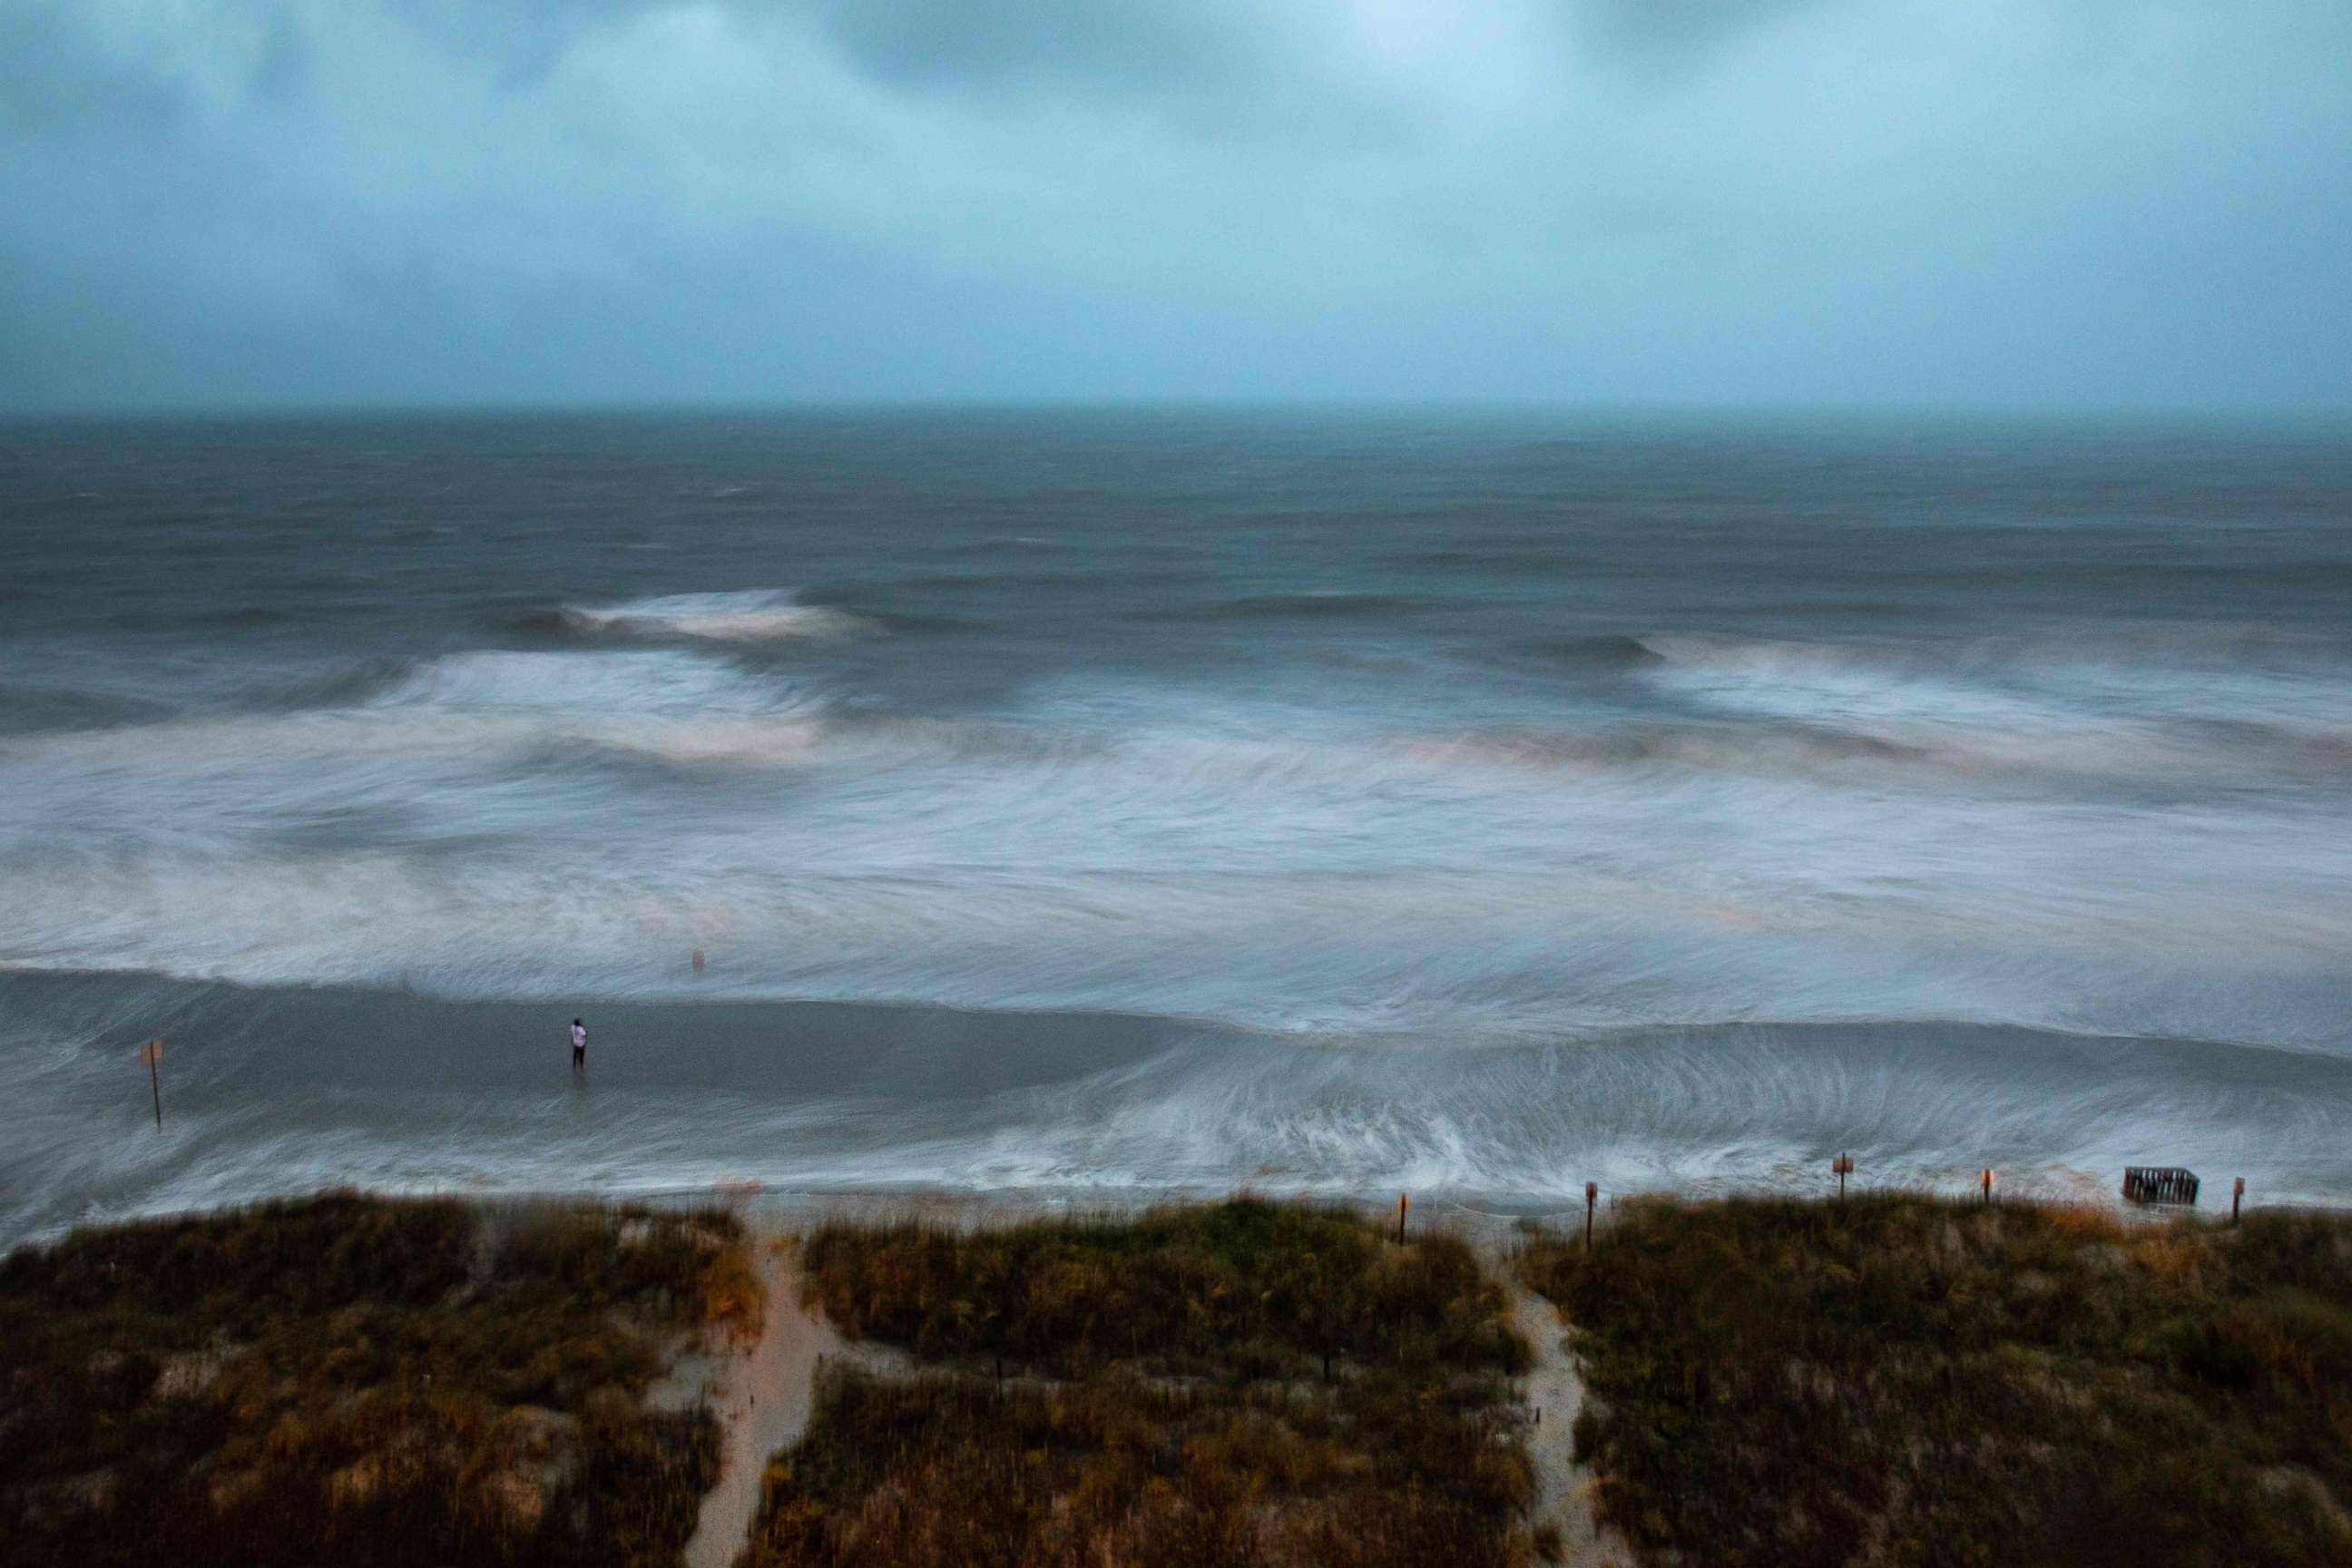 PHOTO: Large surf is swirled by the wind and captured by a long exposure, while a person stands on the shore as Hurricane Isaias approaches North Myrtle Beach, SC on August 3, 2020. 